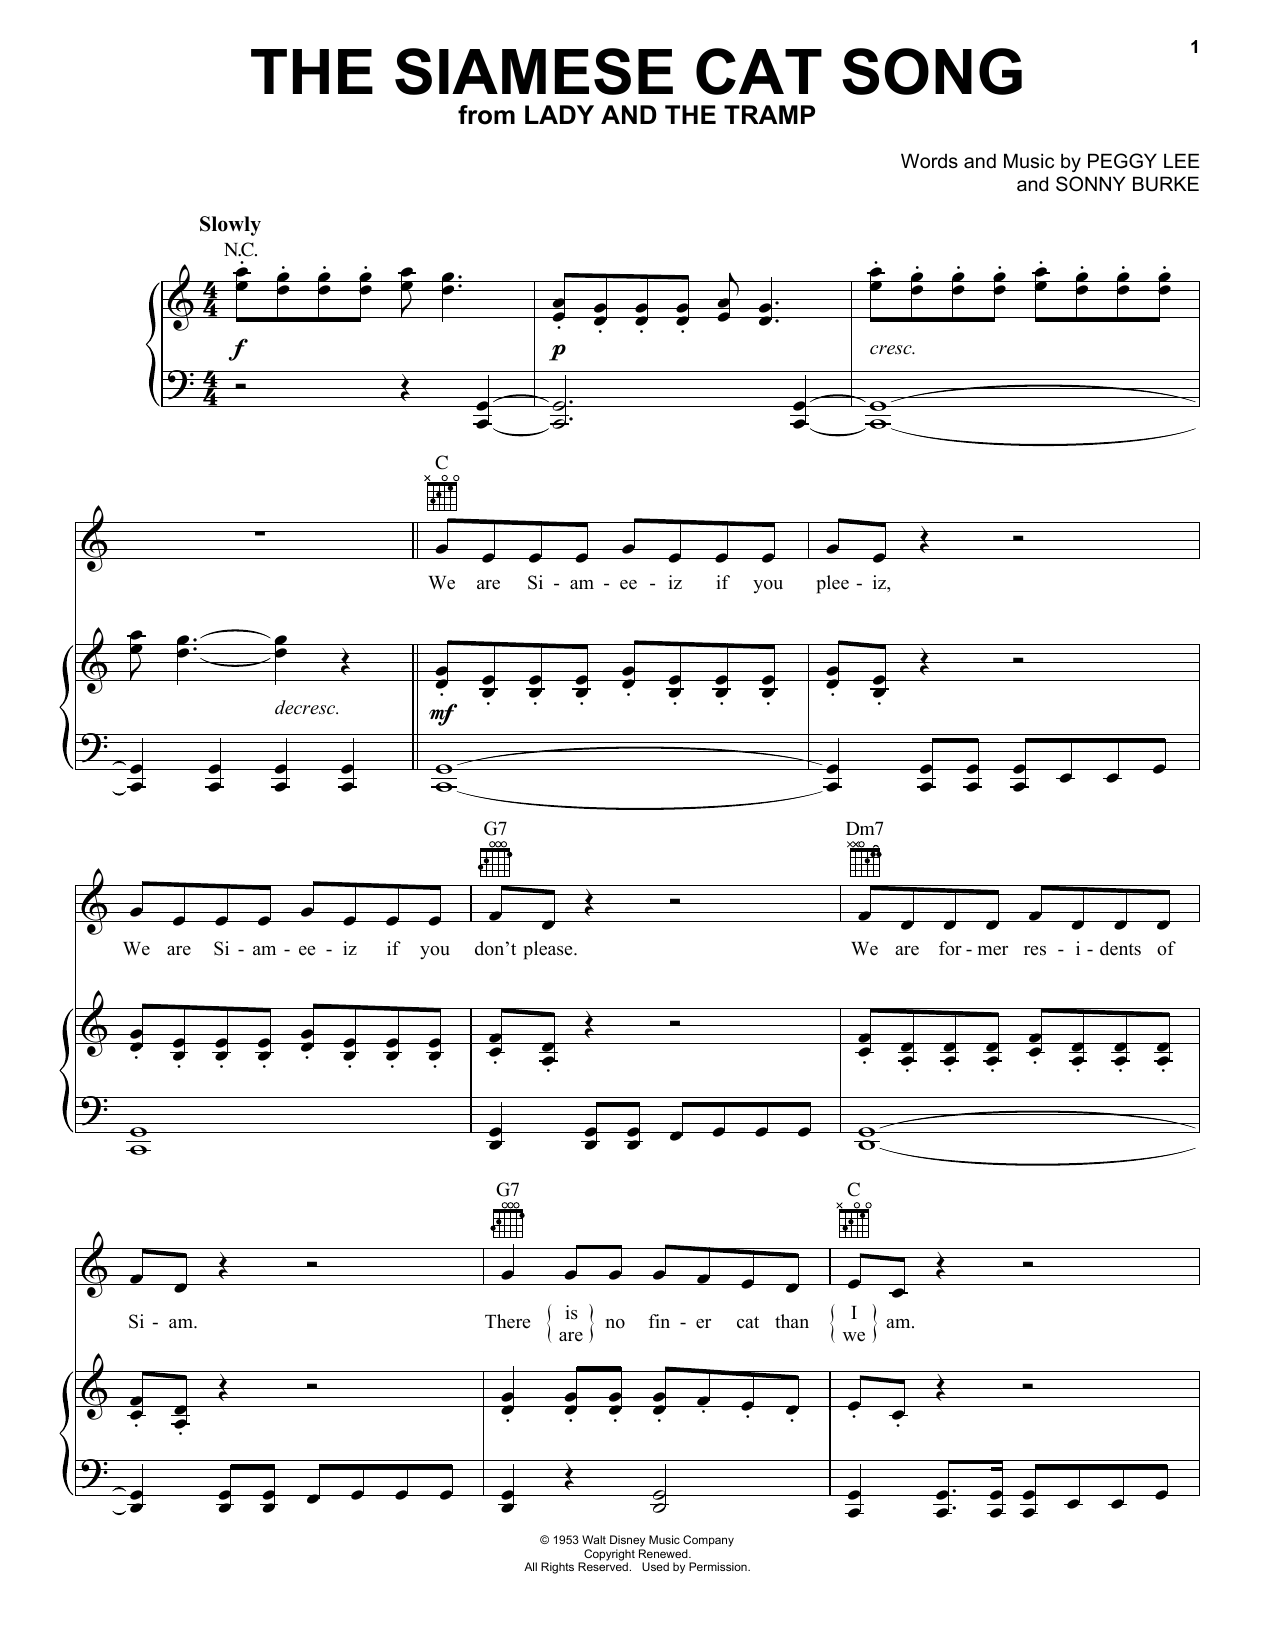 Peggy Lee The Siamese Cat Song (from Lady And The Tramp) sheet music notes and chords. Download Printable PDF.